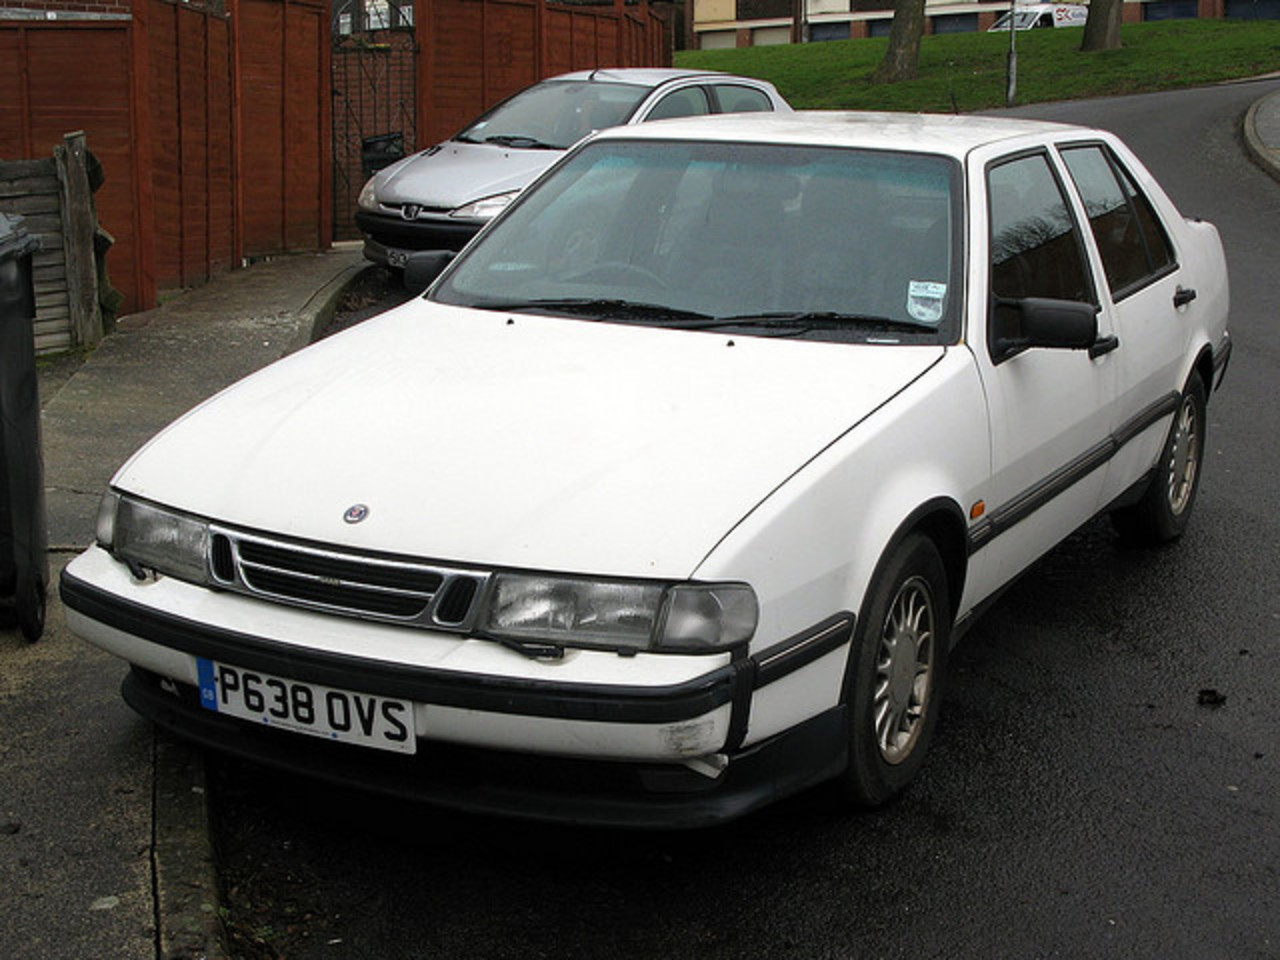 Our white Saab 9000 CDE | Flickr - Photo Sharing!